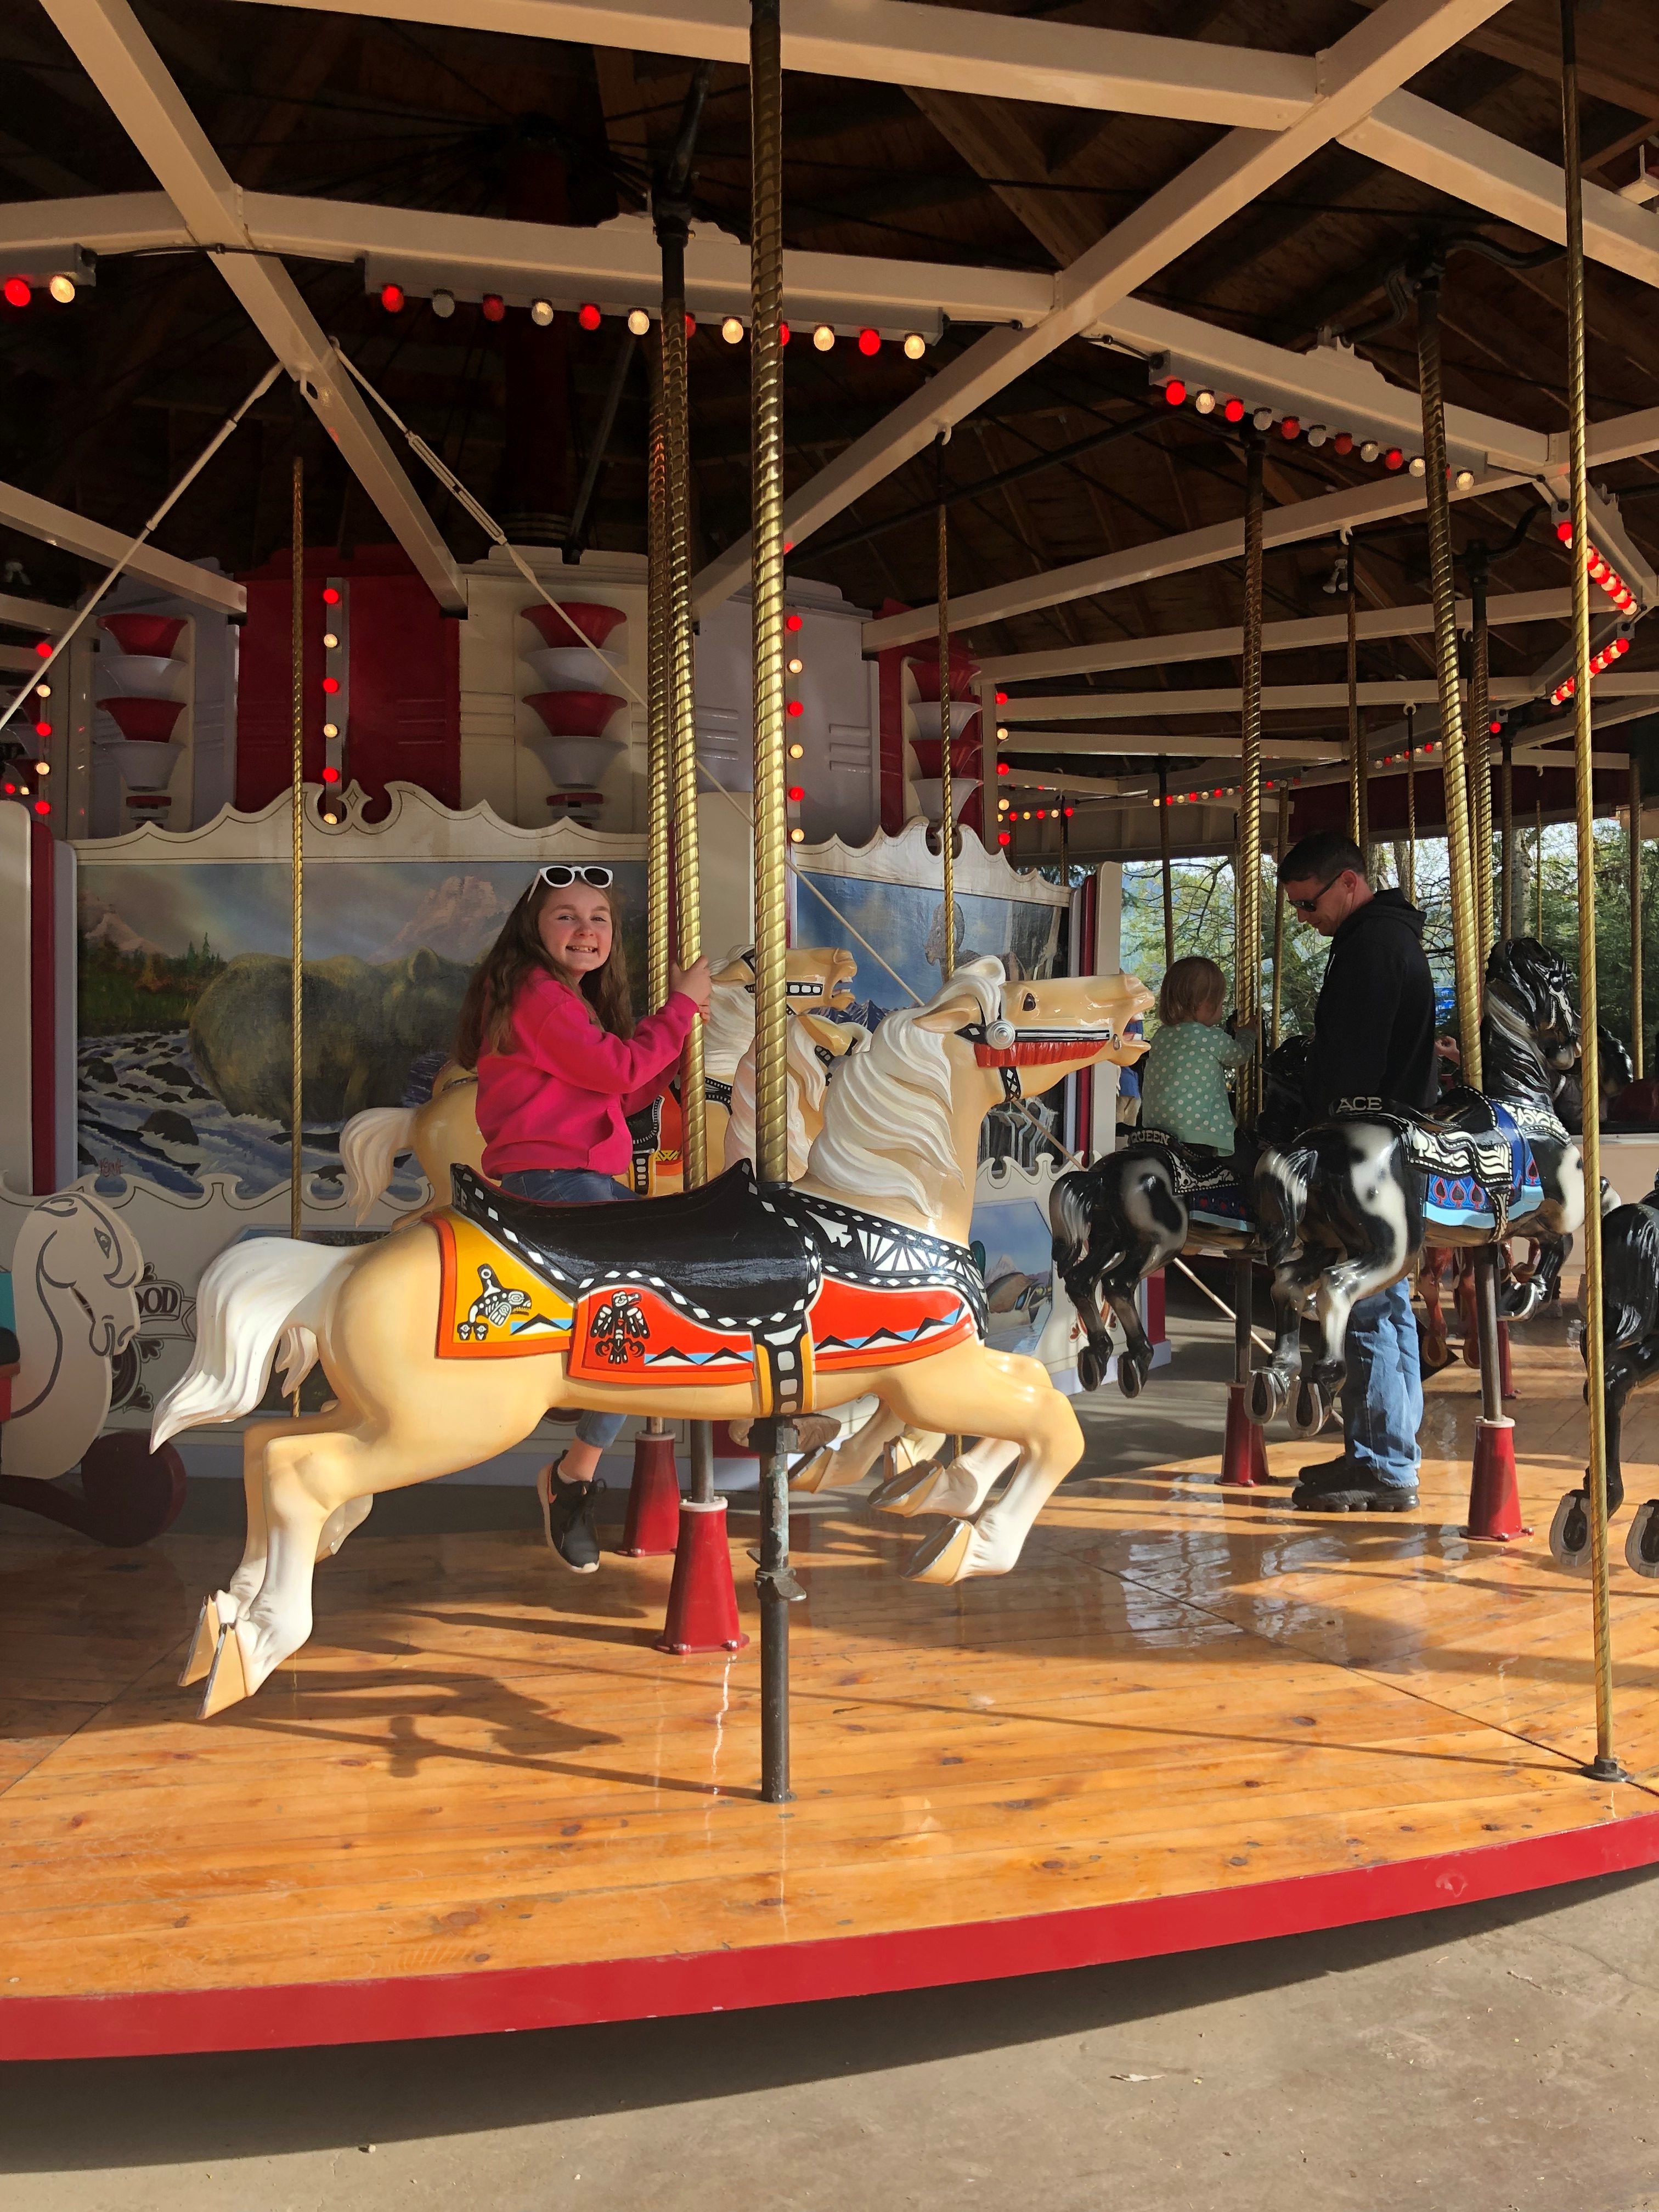 The Carousel at Silverwood Theme Park